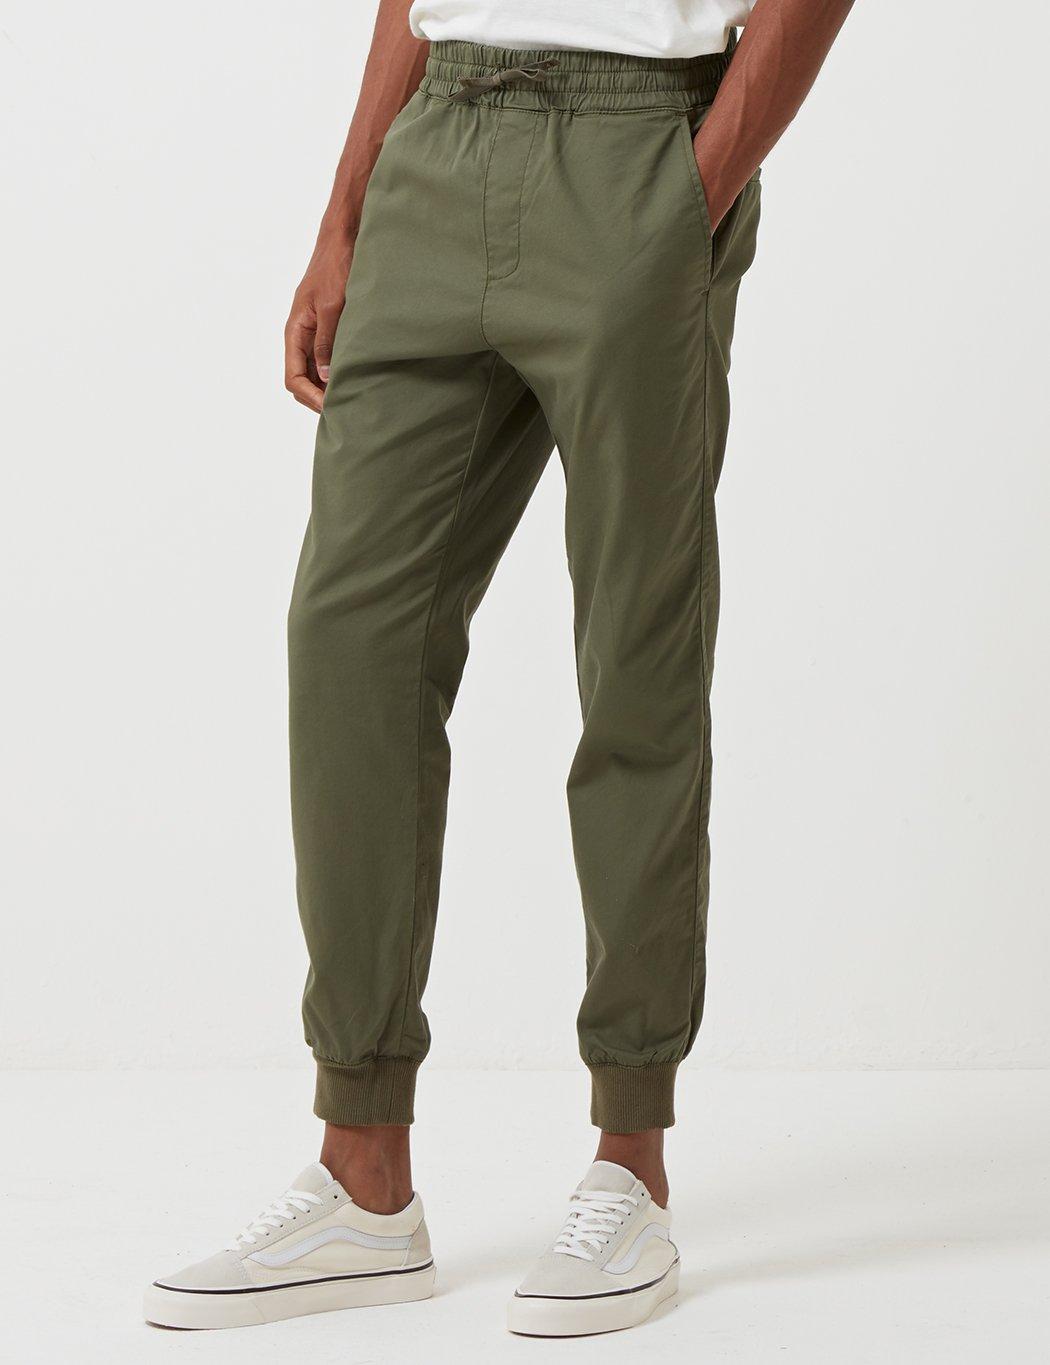 Carhartt Synthetic Wip Madison Jogger Cuffed Pants in Green for Men - Lyst